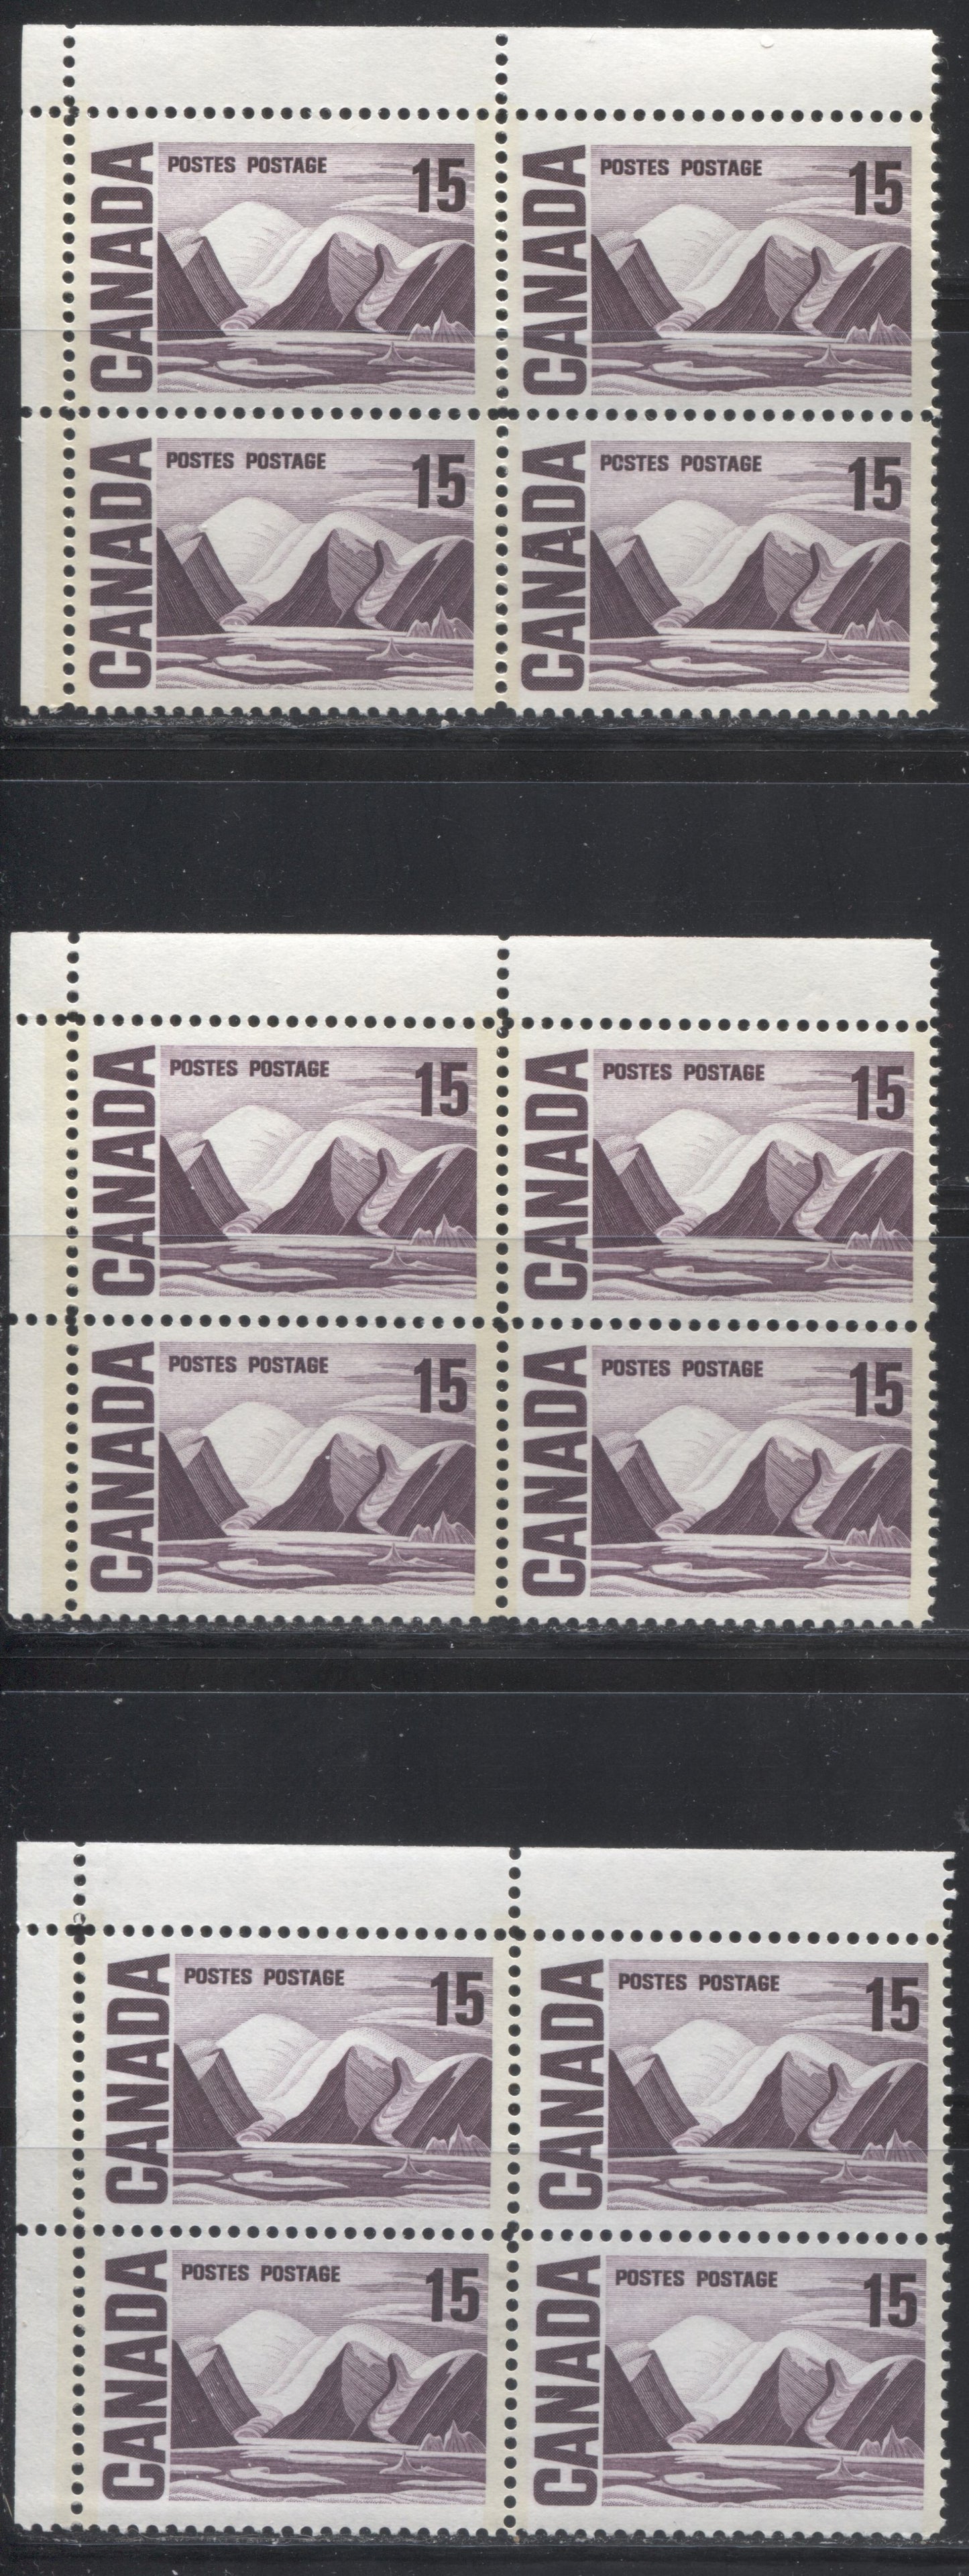 Lot 60 Canada #463piv 15c Deep Reddish Violet & Deep Rose Lilac Greenland Mountains, 1967-1973 Centennial Definitive Issue, Three VFNH UL GT2 Tagged Field Stock Blocks Of 4 On LF Vertical & Horizontal Wove Papers With Eggshell & Satin PVA Gums